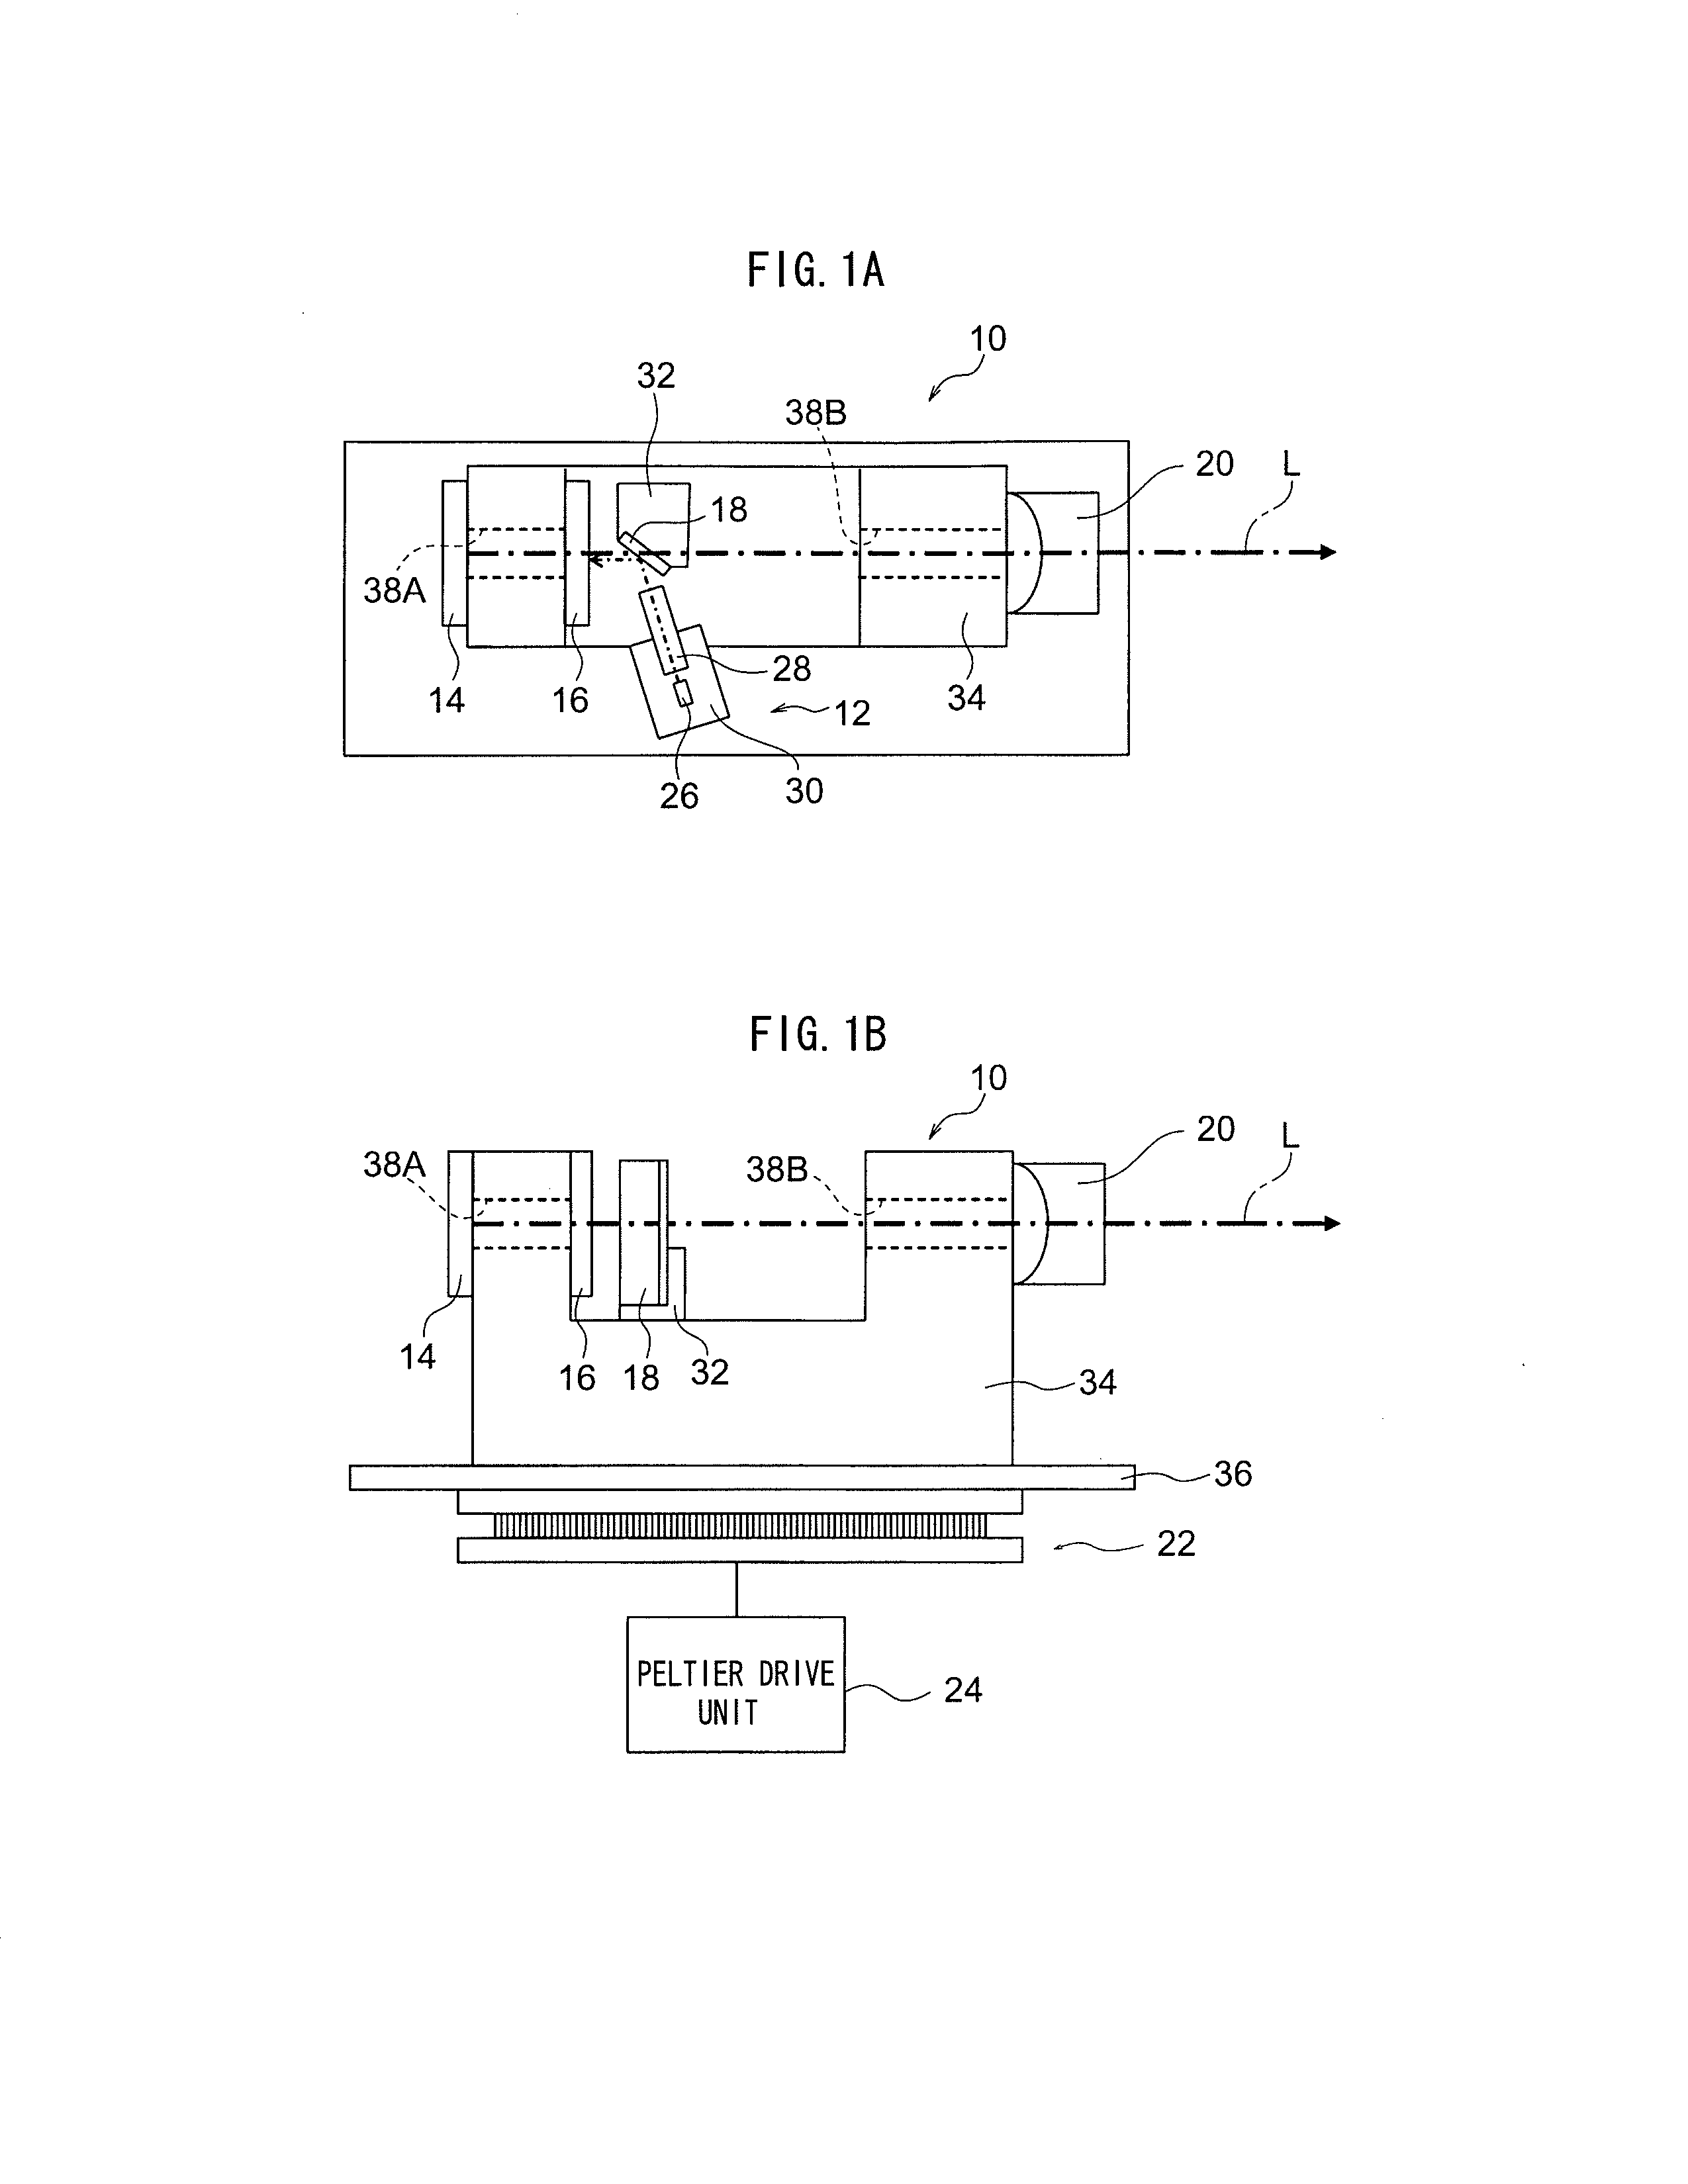 Mode-locked laser device, pulsed laser light source device, microscope device